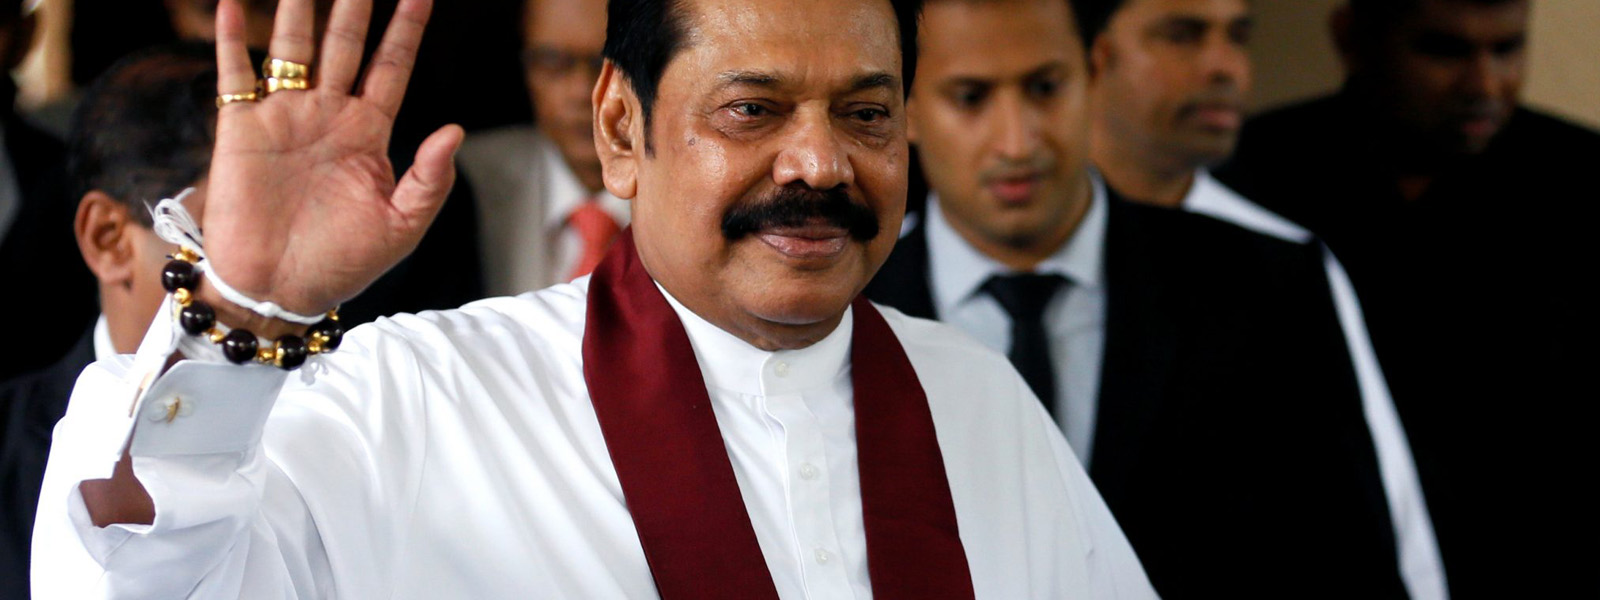 MR looking forward to being the PM of Sri Lanka